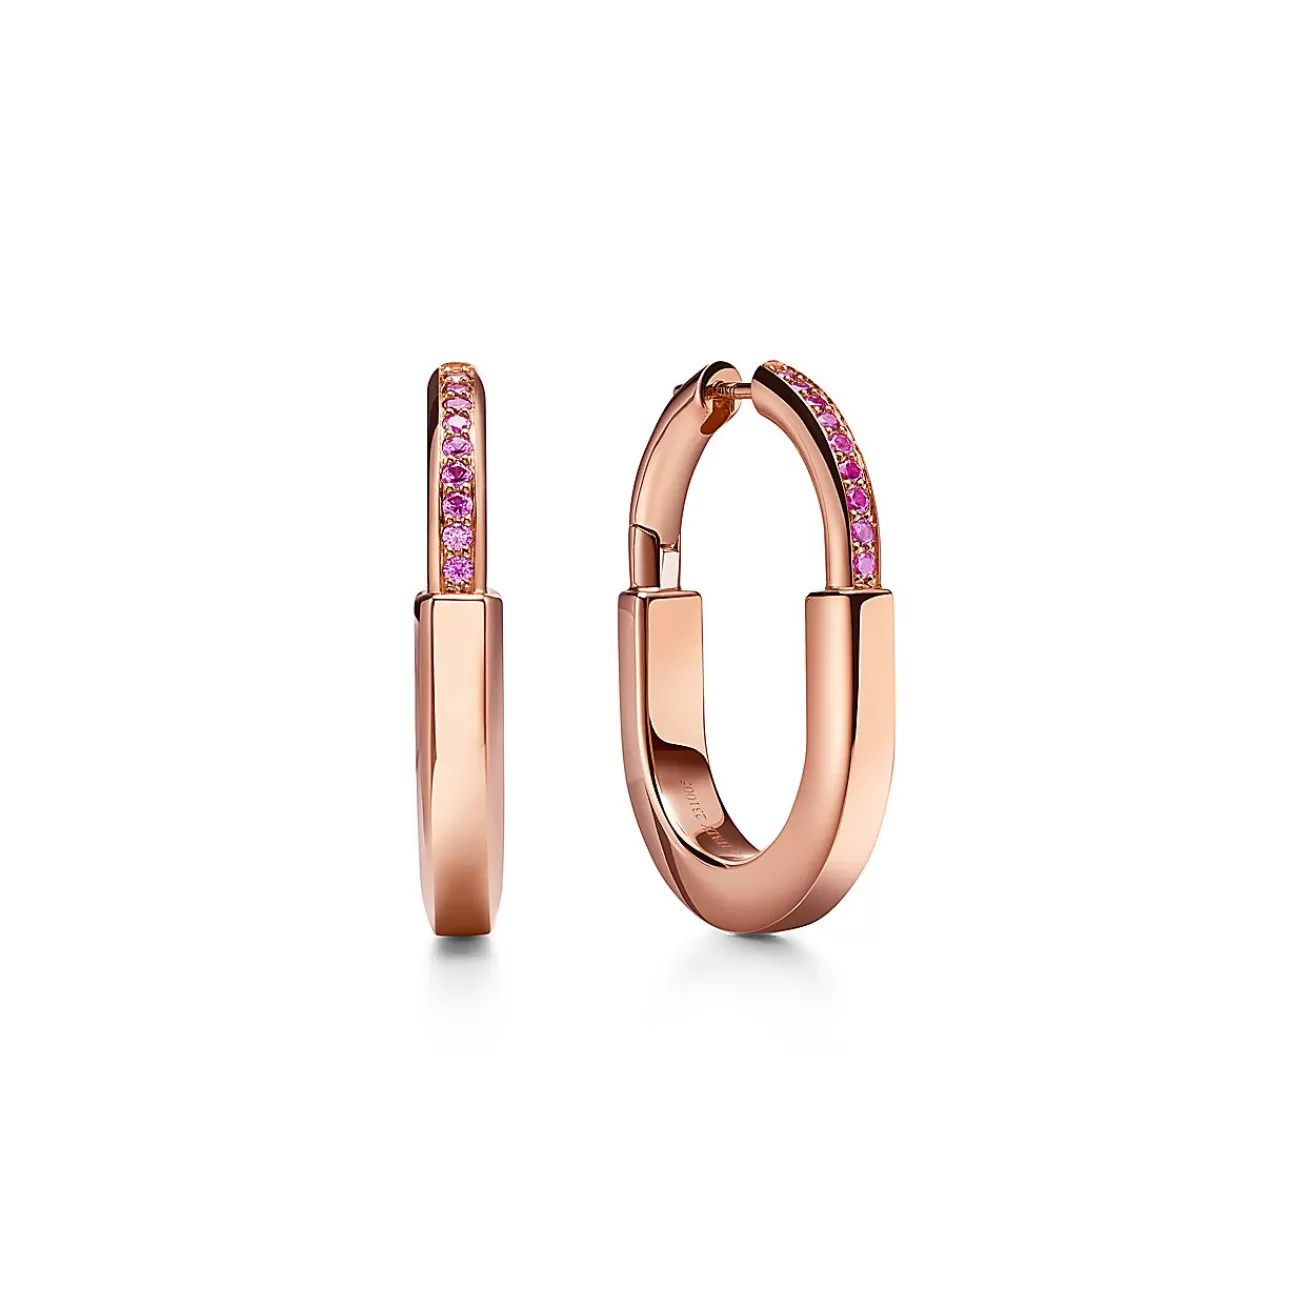 Tiffany & Co. Tiffany Lock Medium Earrings in Rose Gold with Pink Sapphires | ^ Earrings | New Jewelry